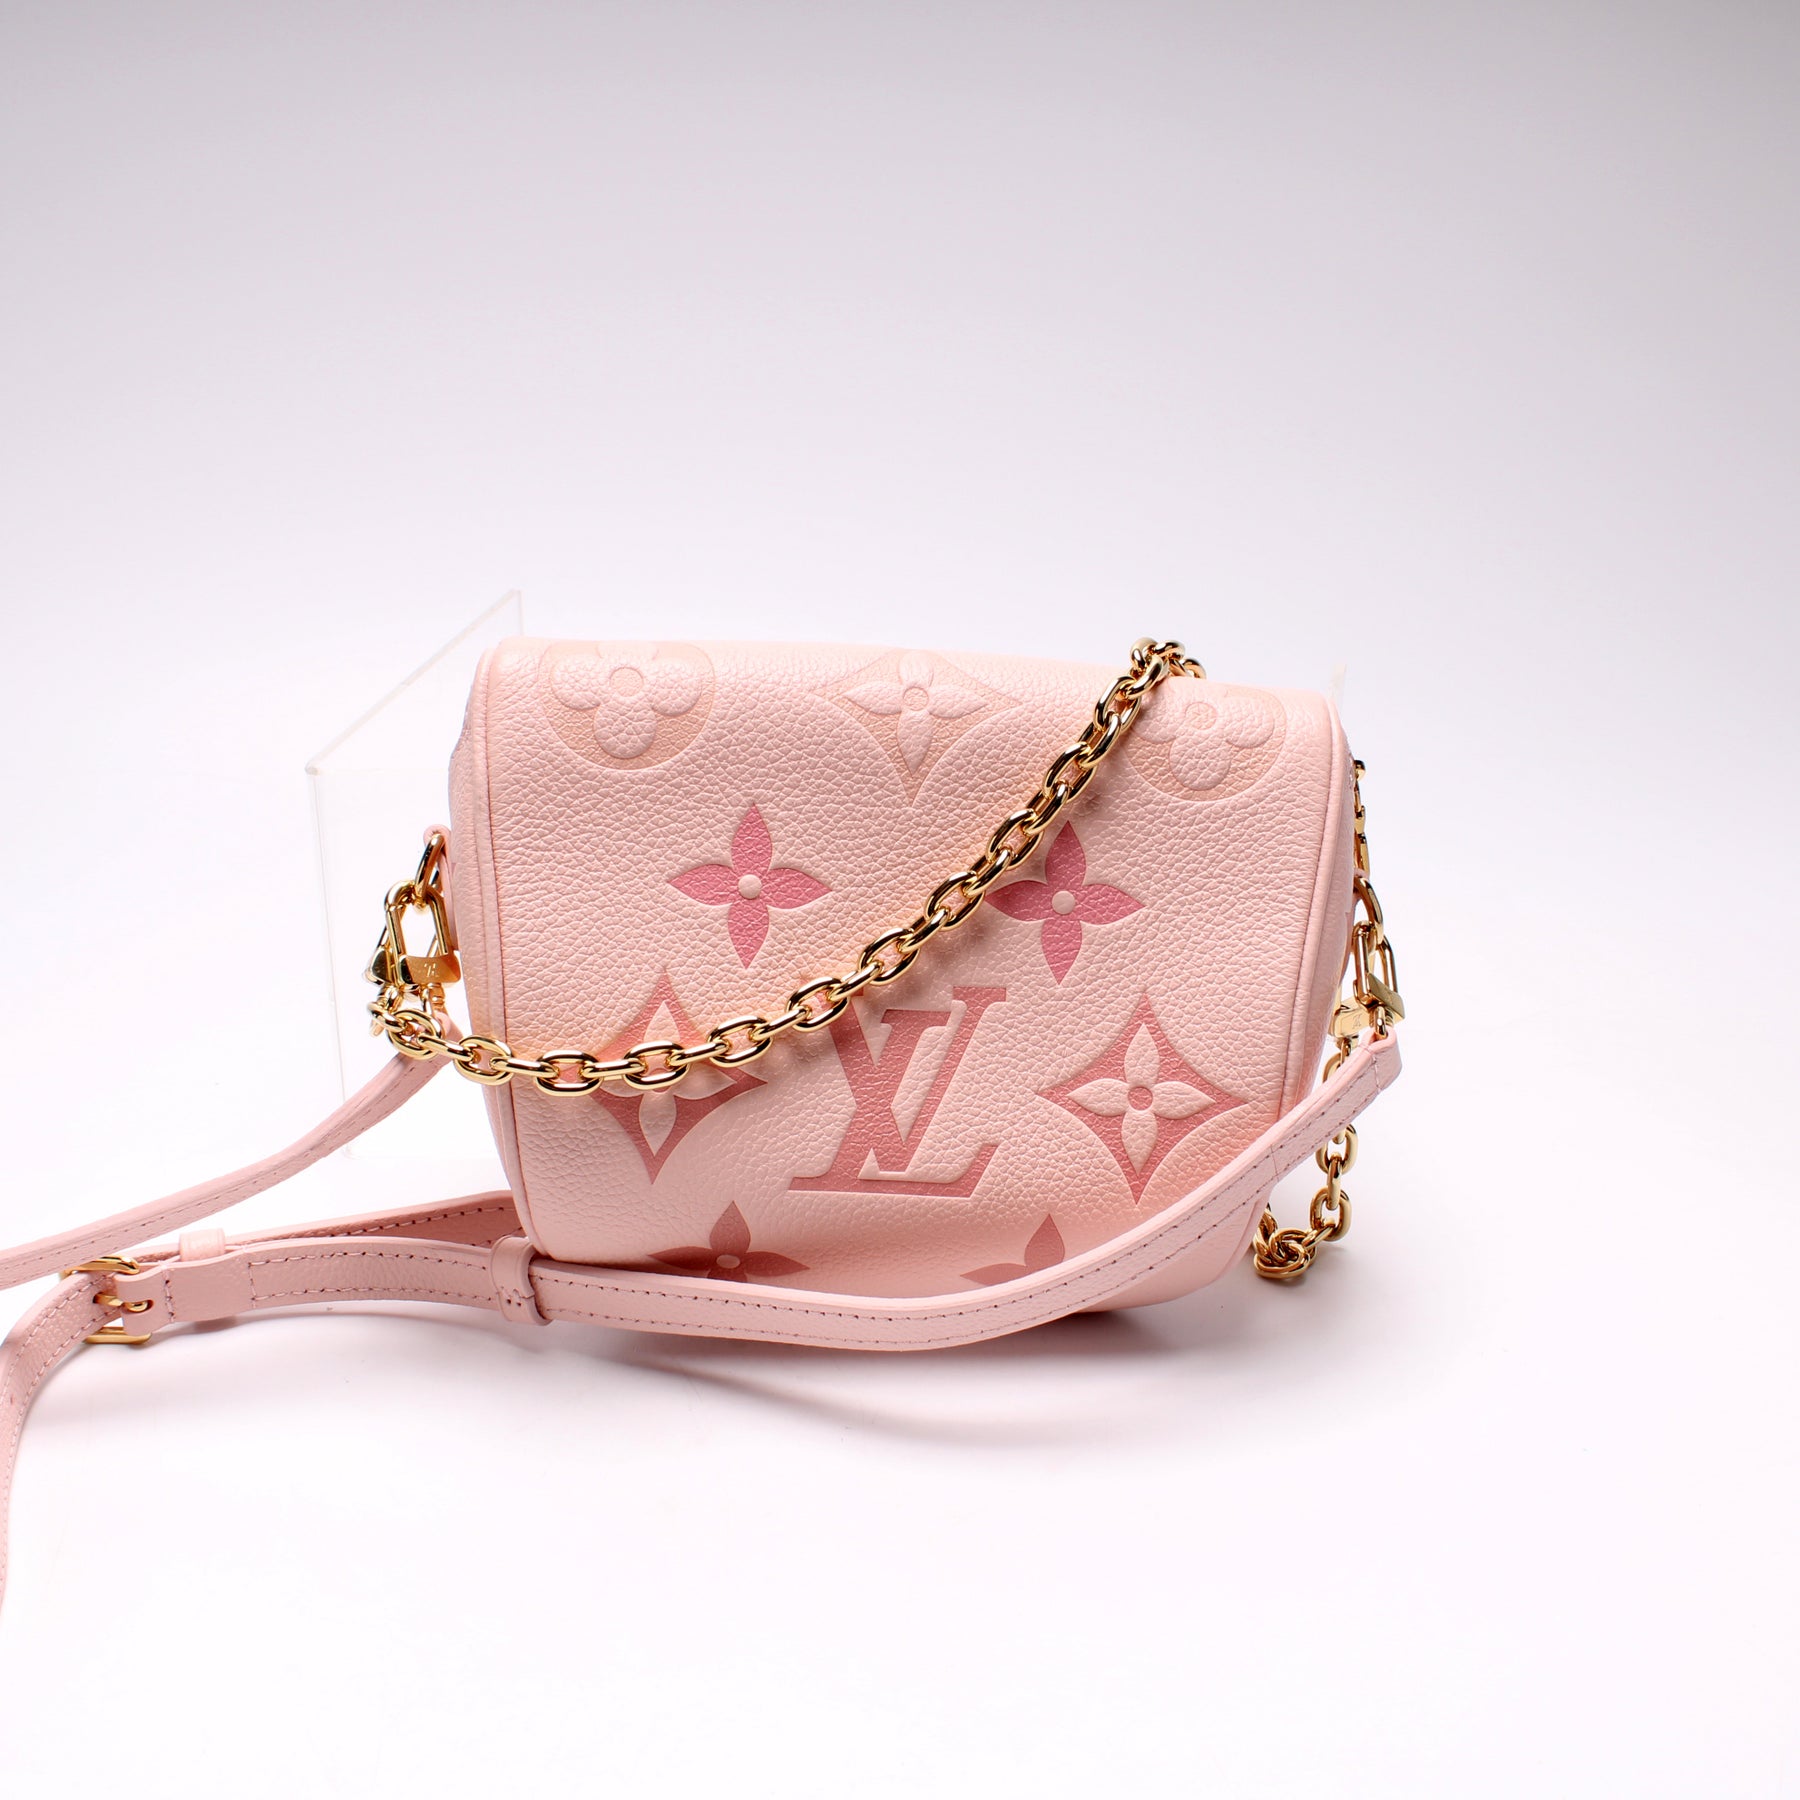 LOUIS VUITTON IS COMING OUT WITH THE MINI BUMBAG EMPREINTE LEATHER